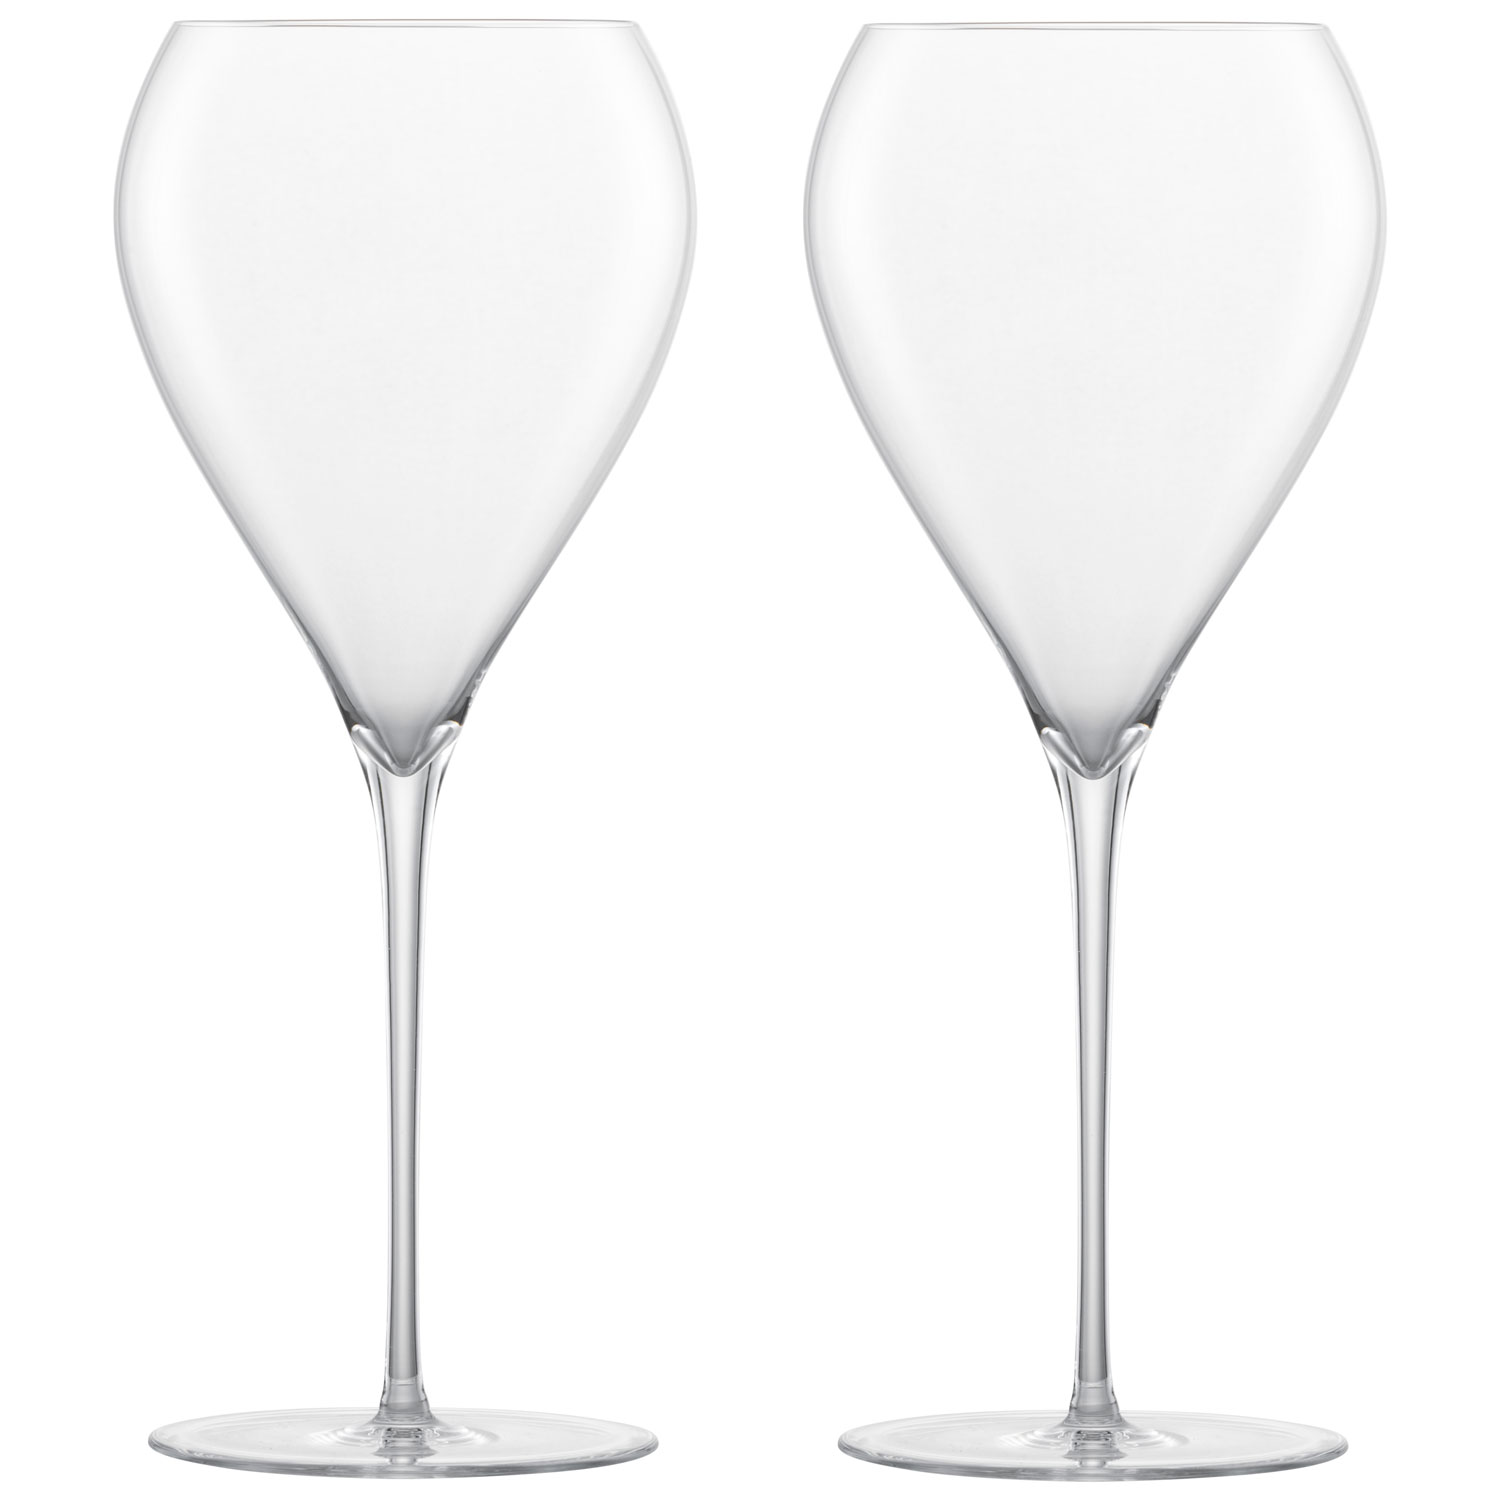 blomus Modern Colored Wine Glasses (Set of 4), 3 Colors, 5 Styles